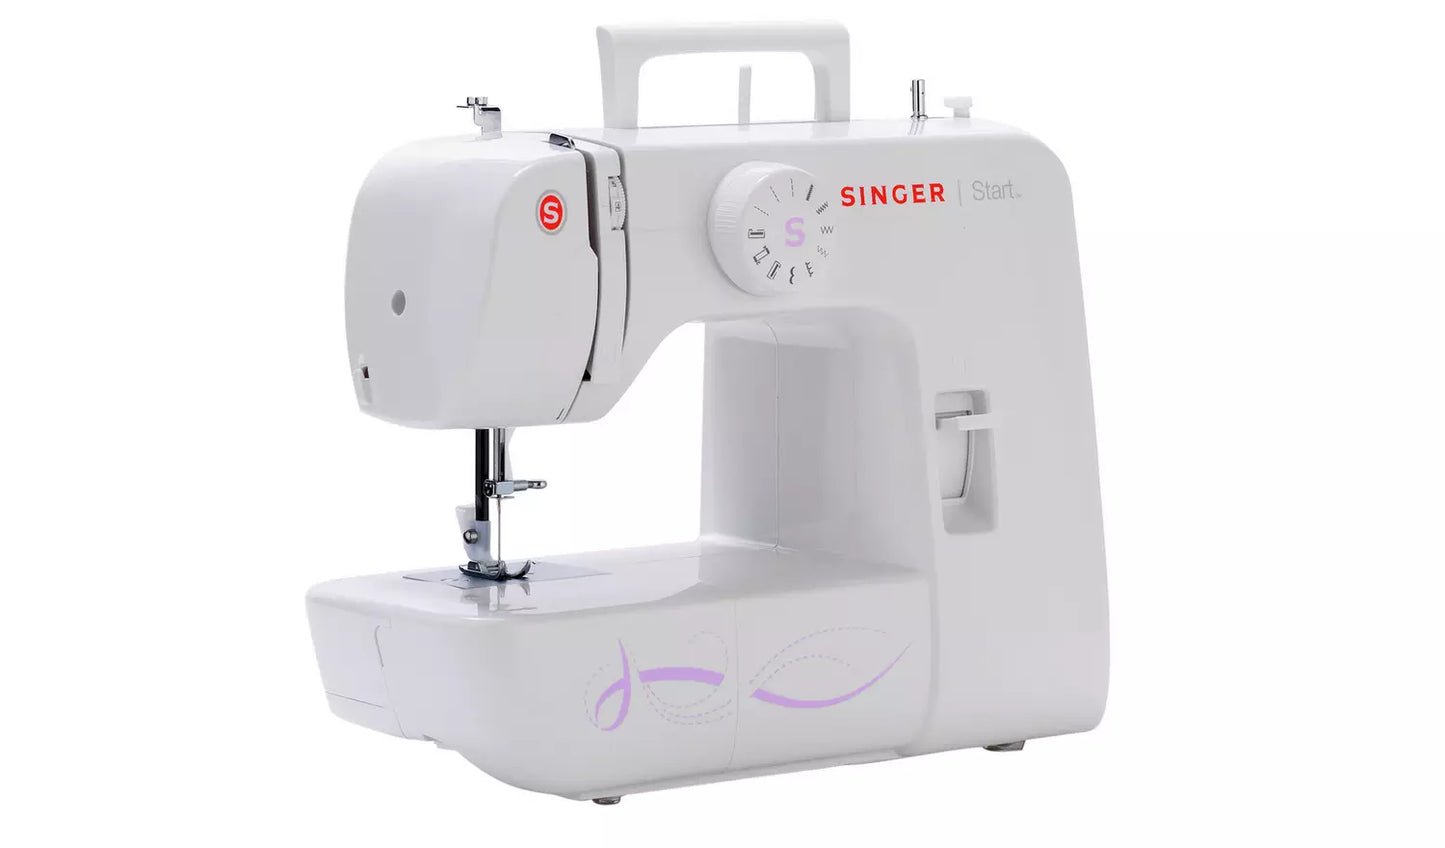 Singer Start 1306 Sewing Machine - Order and get a FREE upgrade to the new M21 model at no extra cost